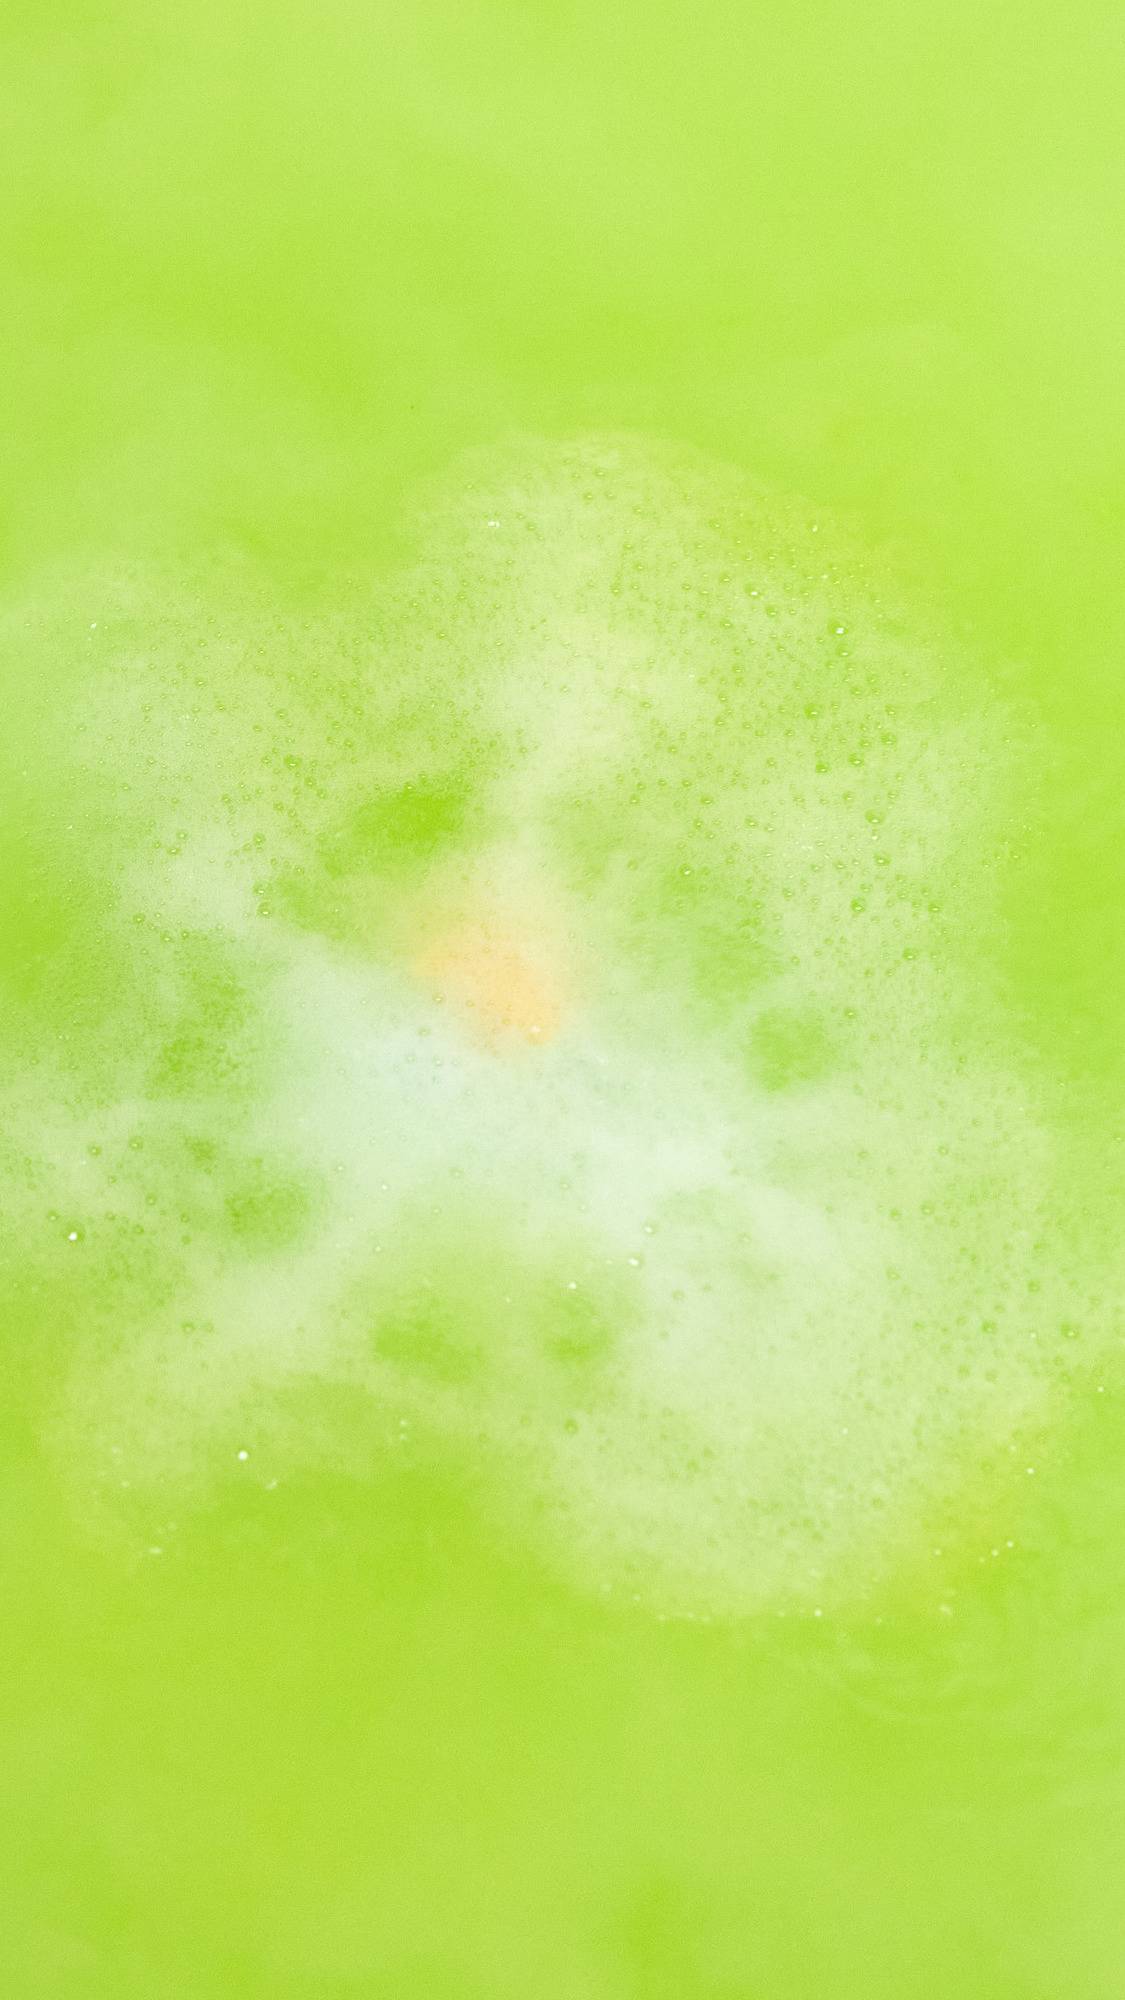 The Slammer bath bomb is slowly dissolving, leaving behind a vivid, lime-green sea of water. 